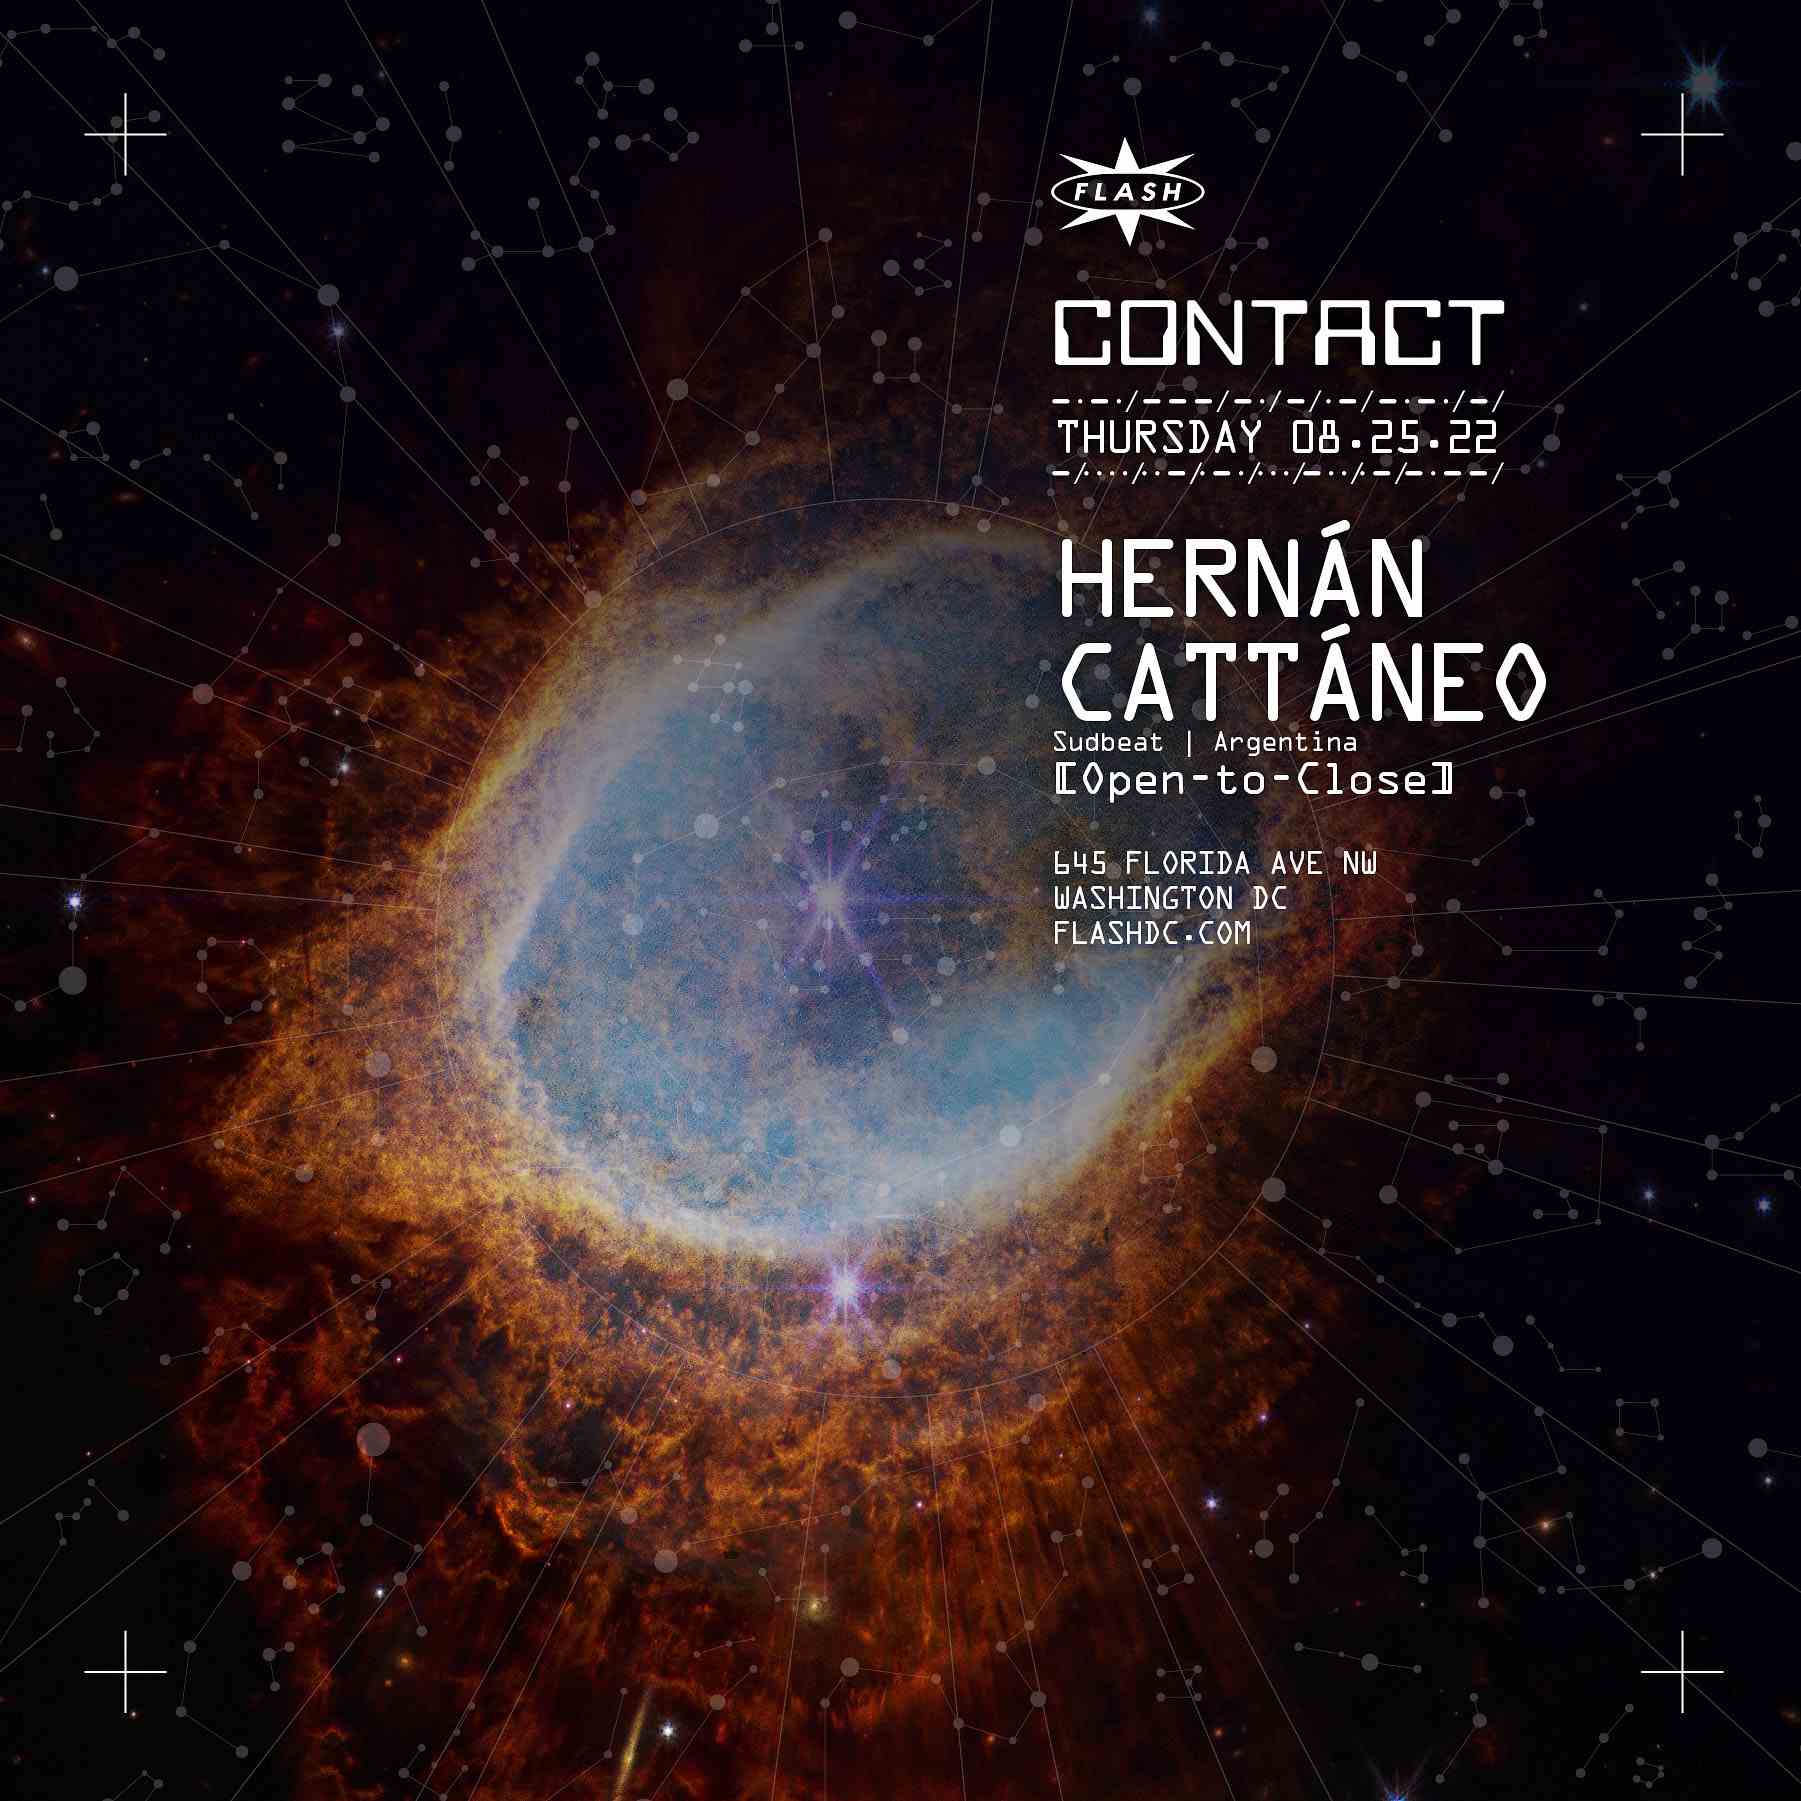 CONTACT: Hernan Cattaneo [Open-to-Close] event thumbnail